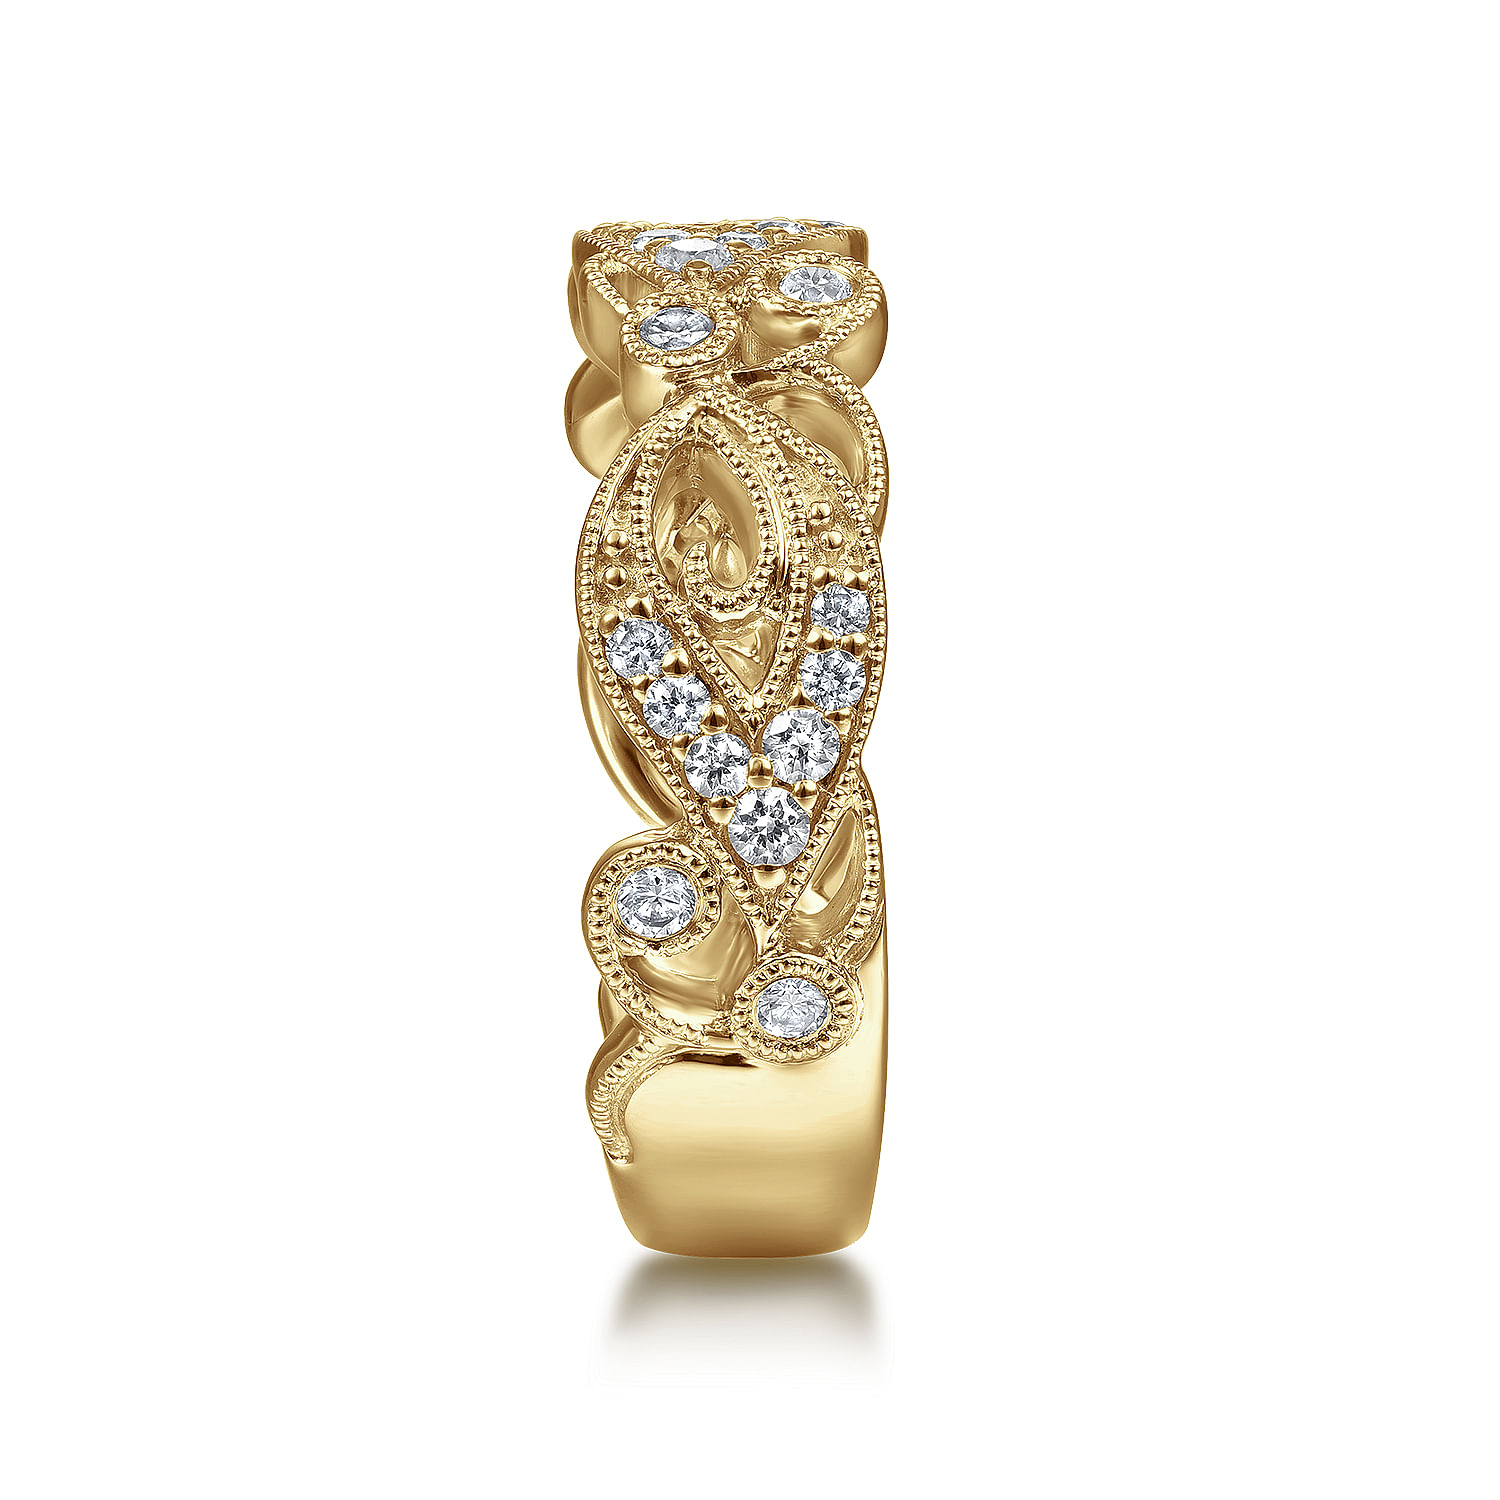 14K Yellow Gold Floral Inspired Diamond Stackable Ring